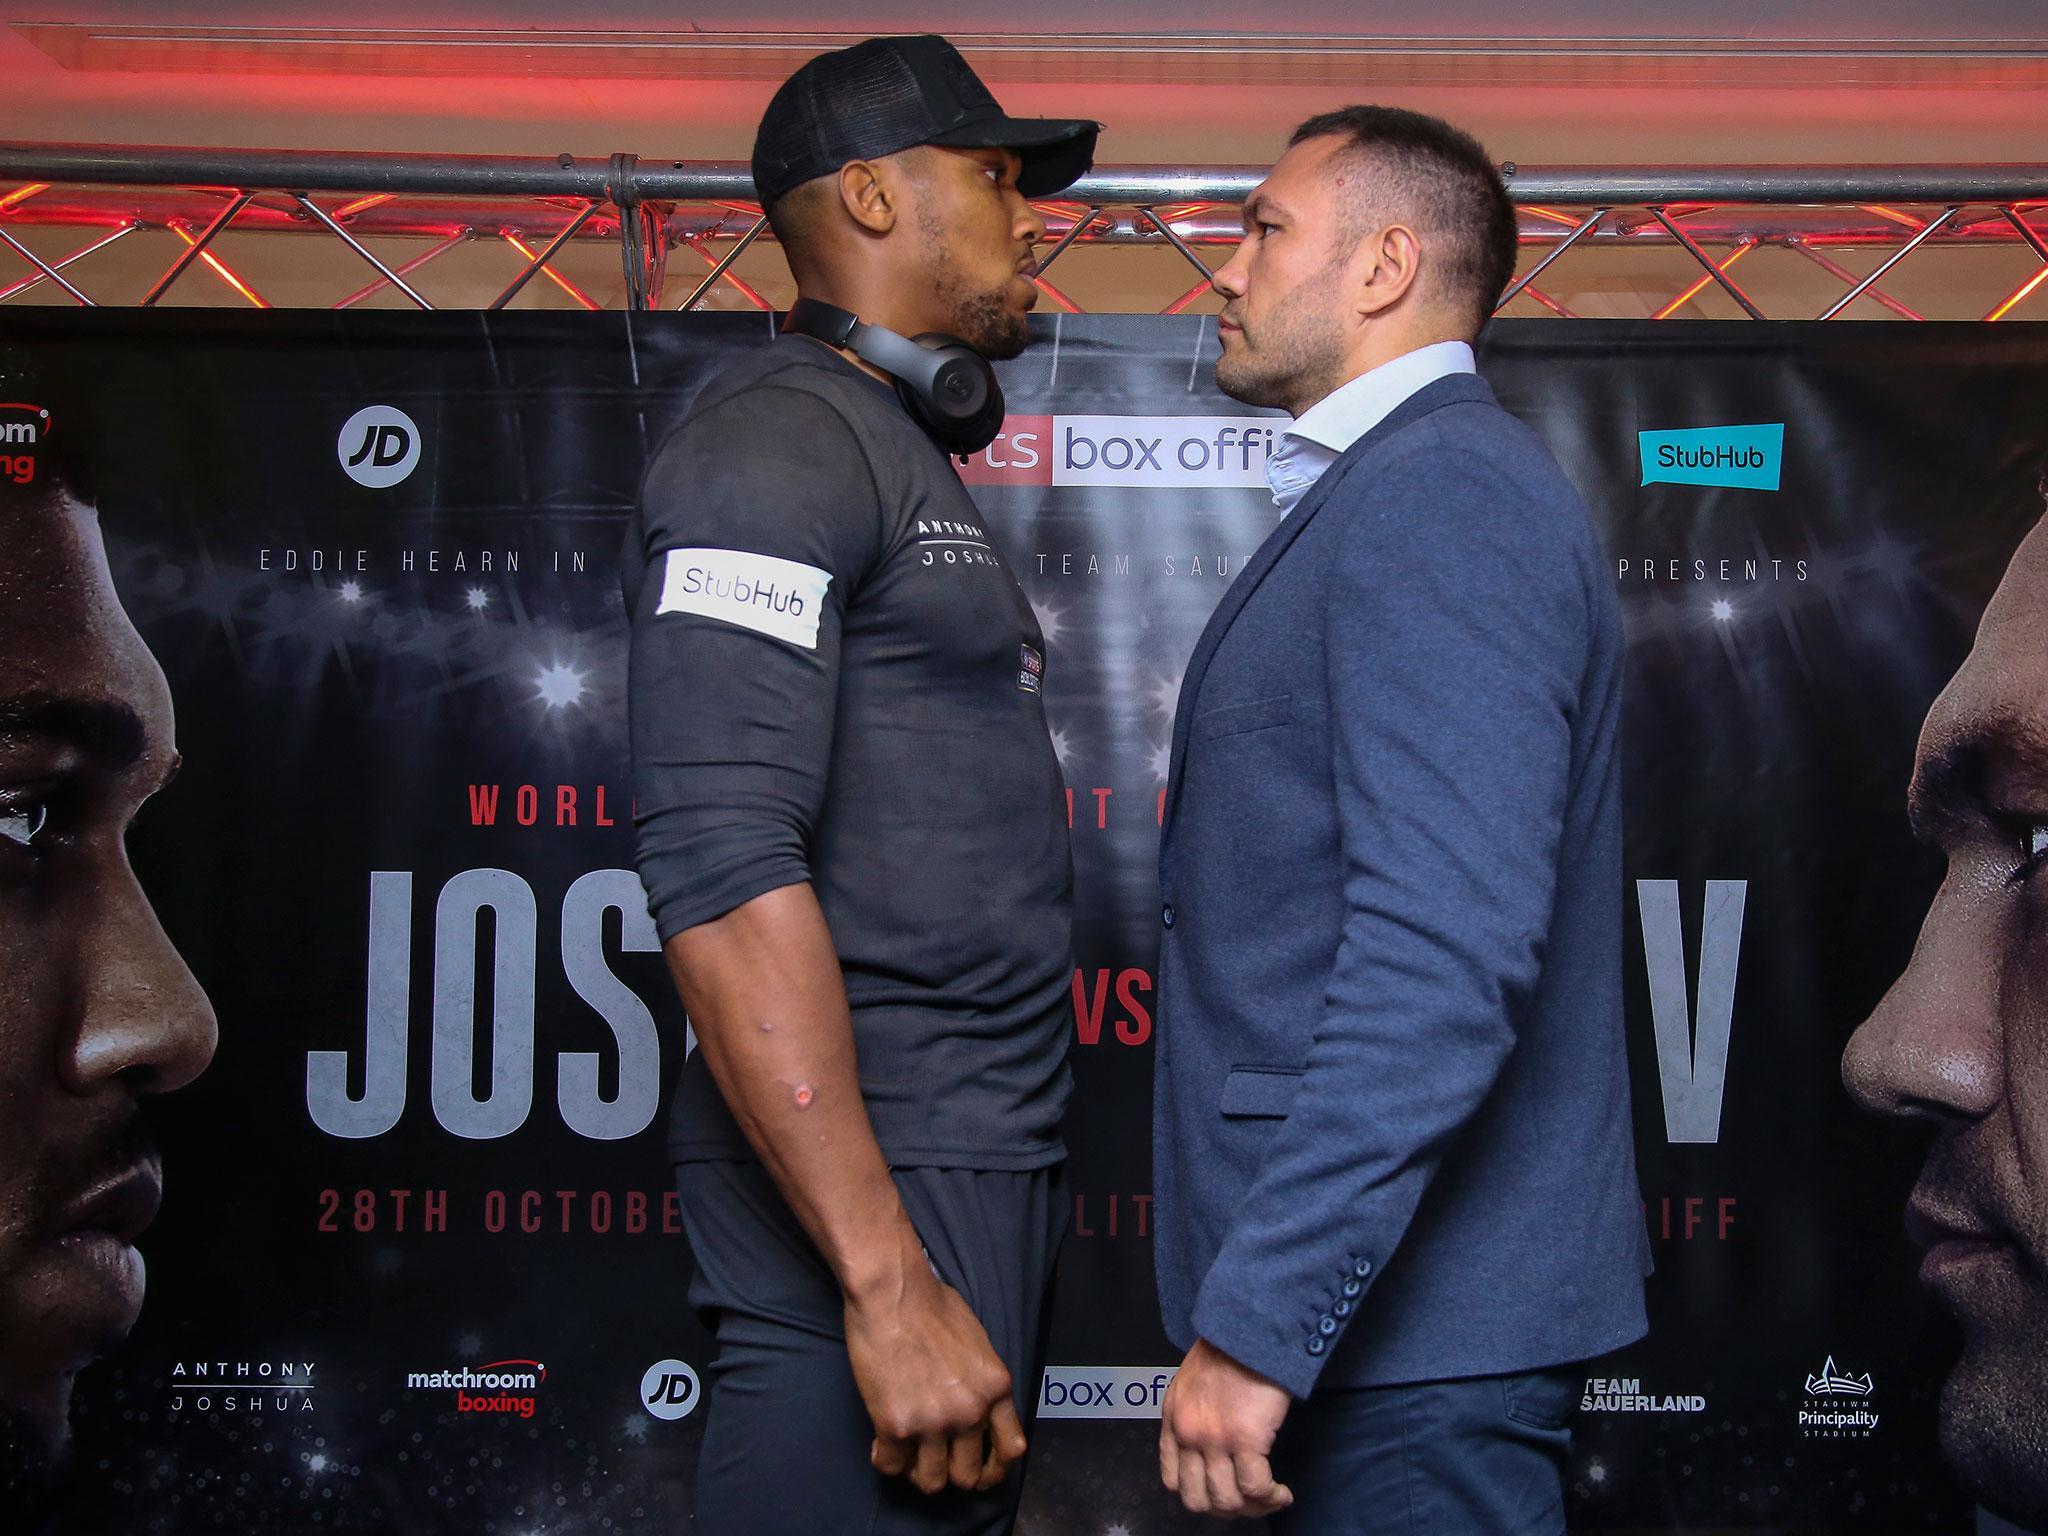 Anthony Joshua and Kubrat Pulev were set to face one another next week